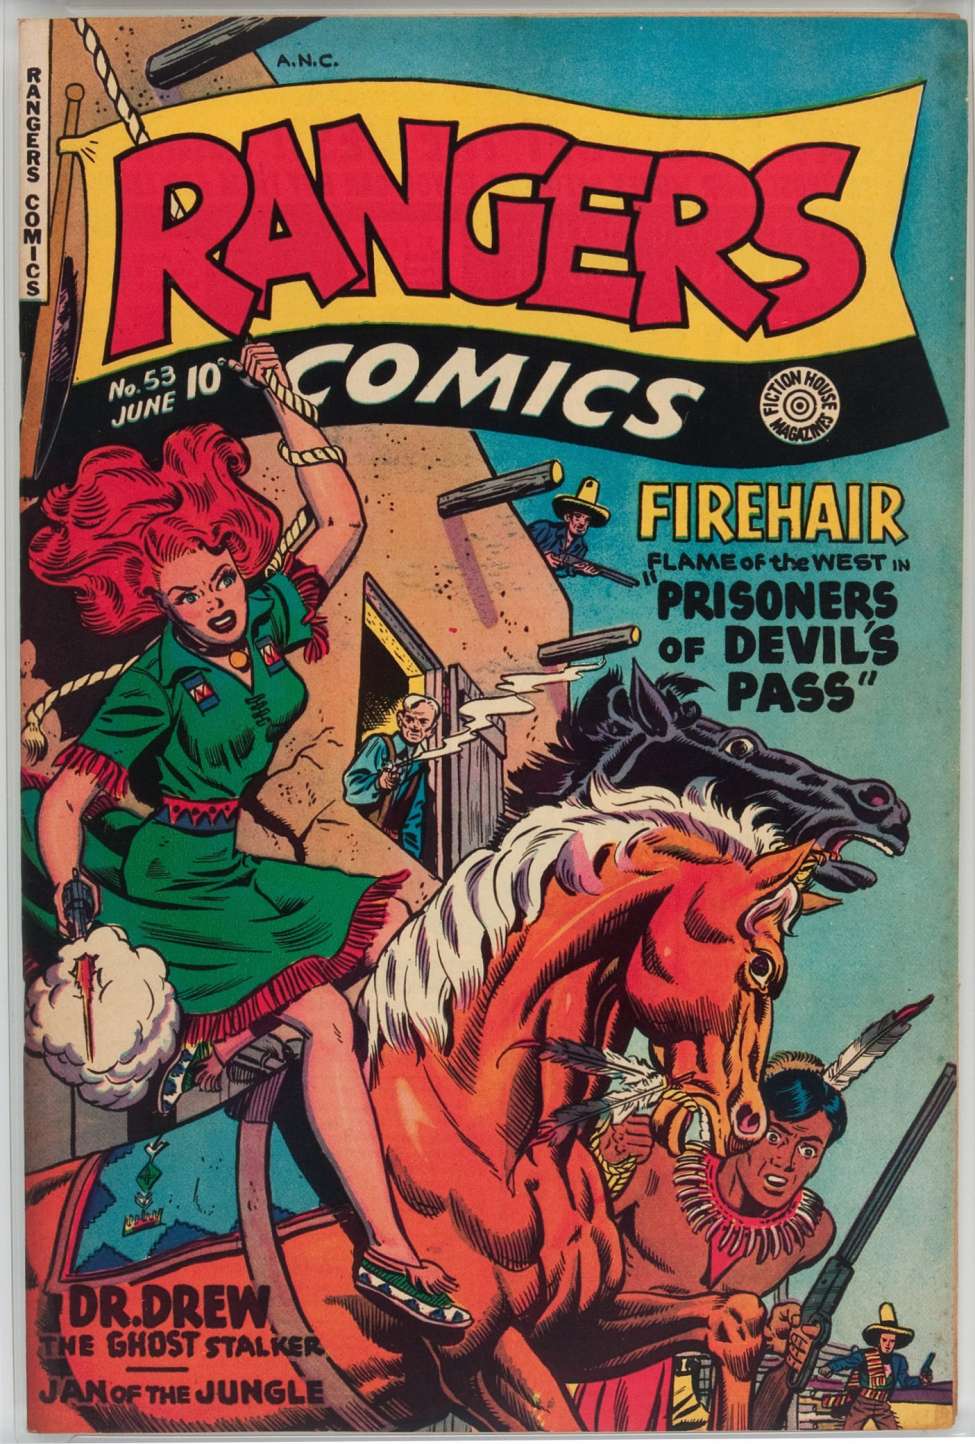 Book Cover For Rangers Comics 53